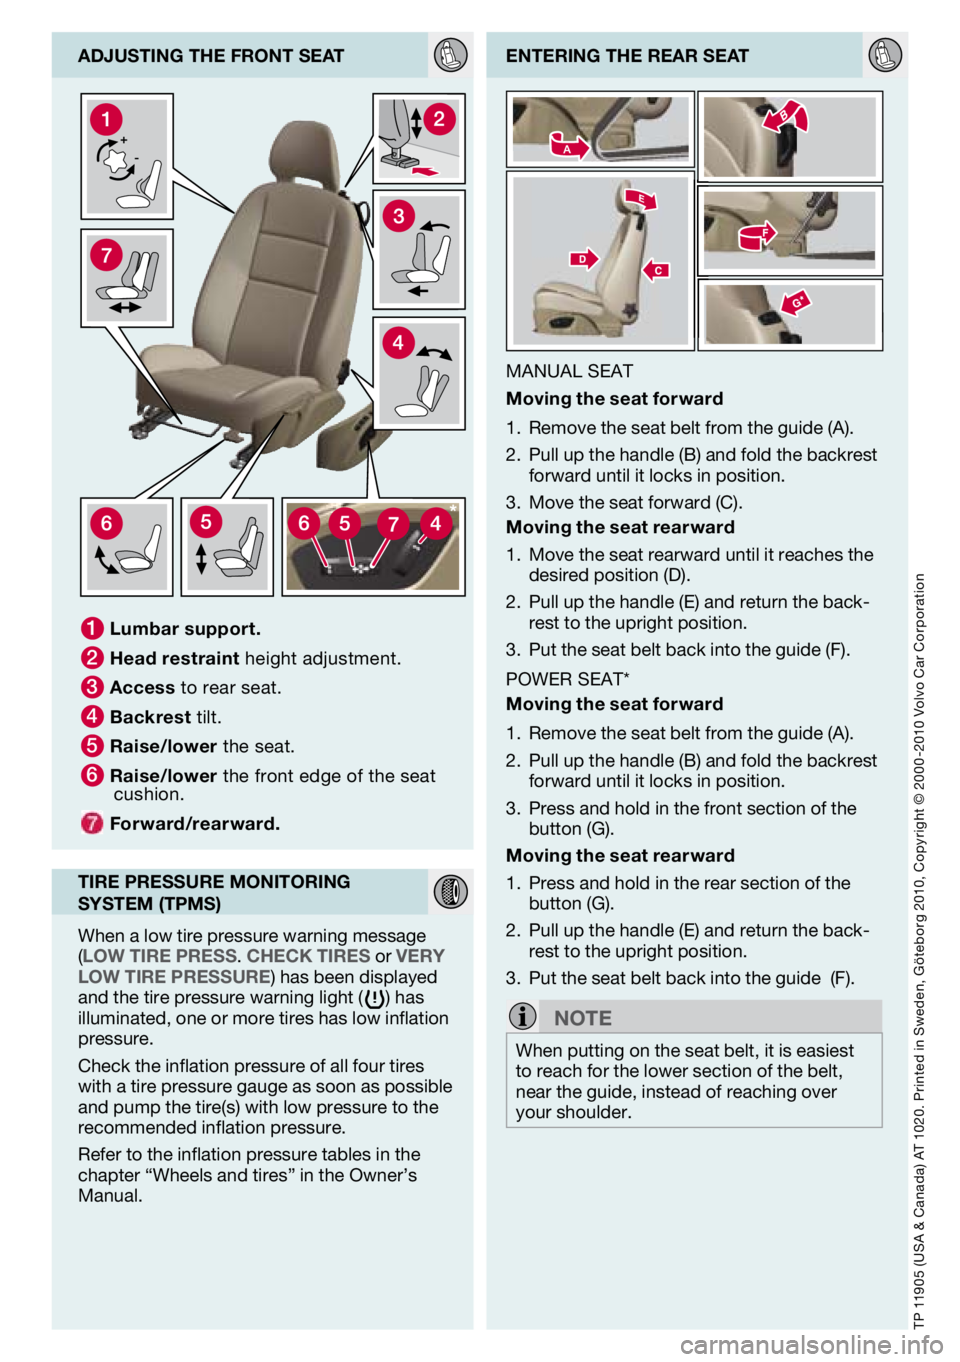 VOLVO C70 2012  Quick Guide 
tP 11905 (U sa & Canada)  at 1020. Printed in  sweden, Göteborg 2010, Copyright © 2000 -2010 Volvo Car Corporation
 
enterIng the rear seat
MaNUal seat
m oving the seat forward
remove the seat belt